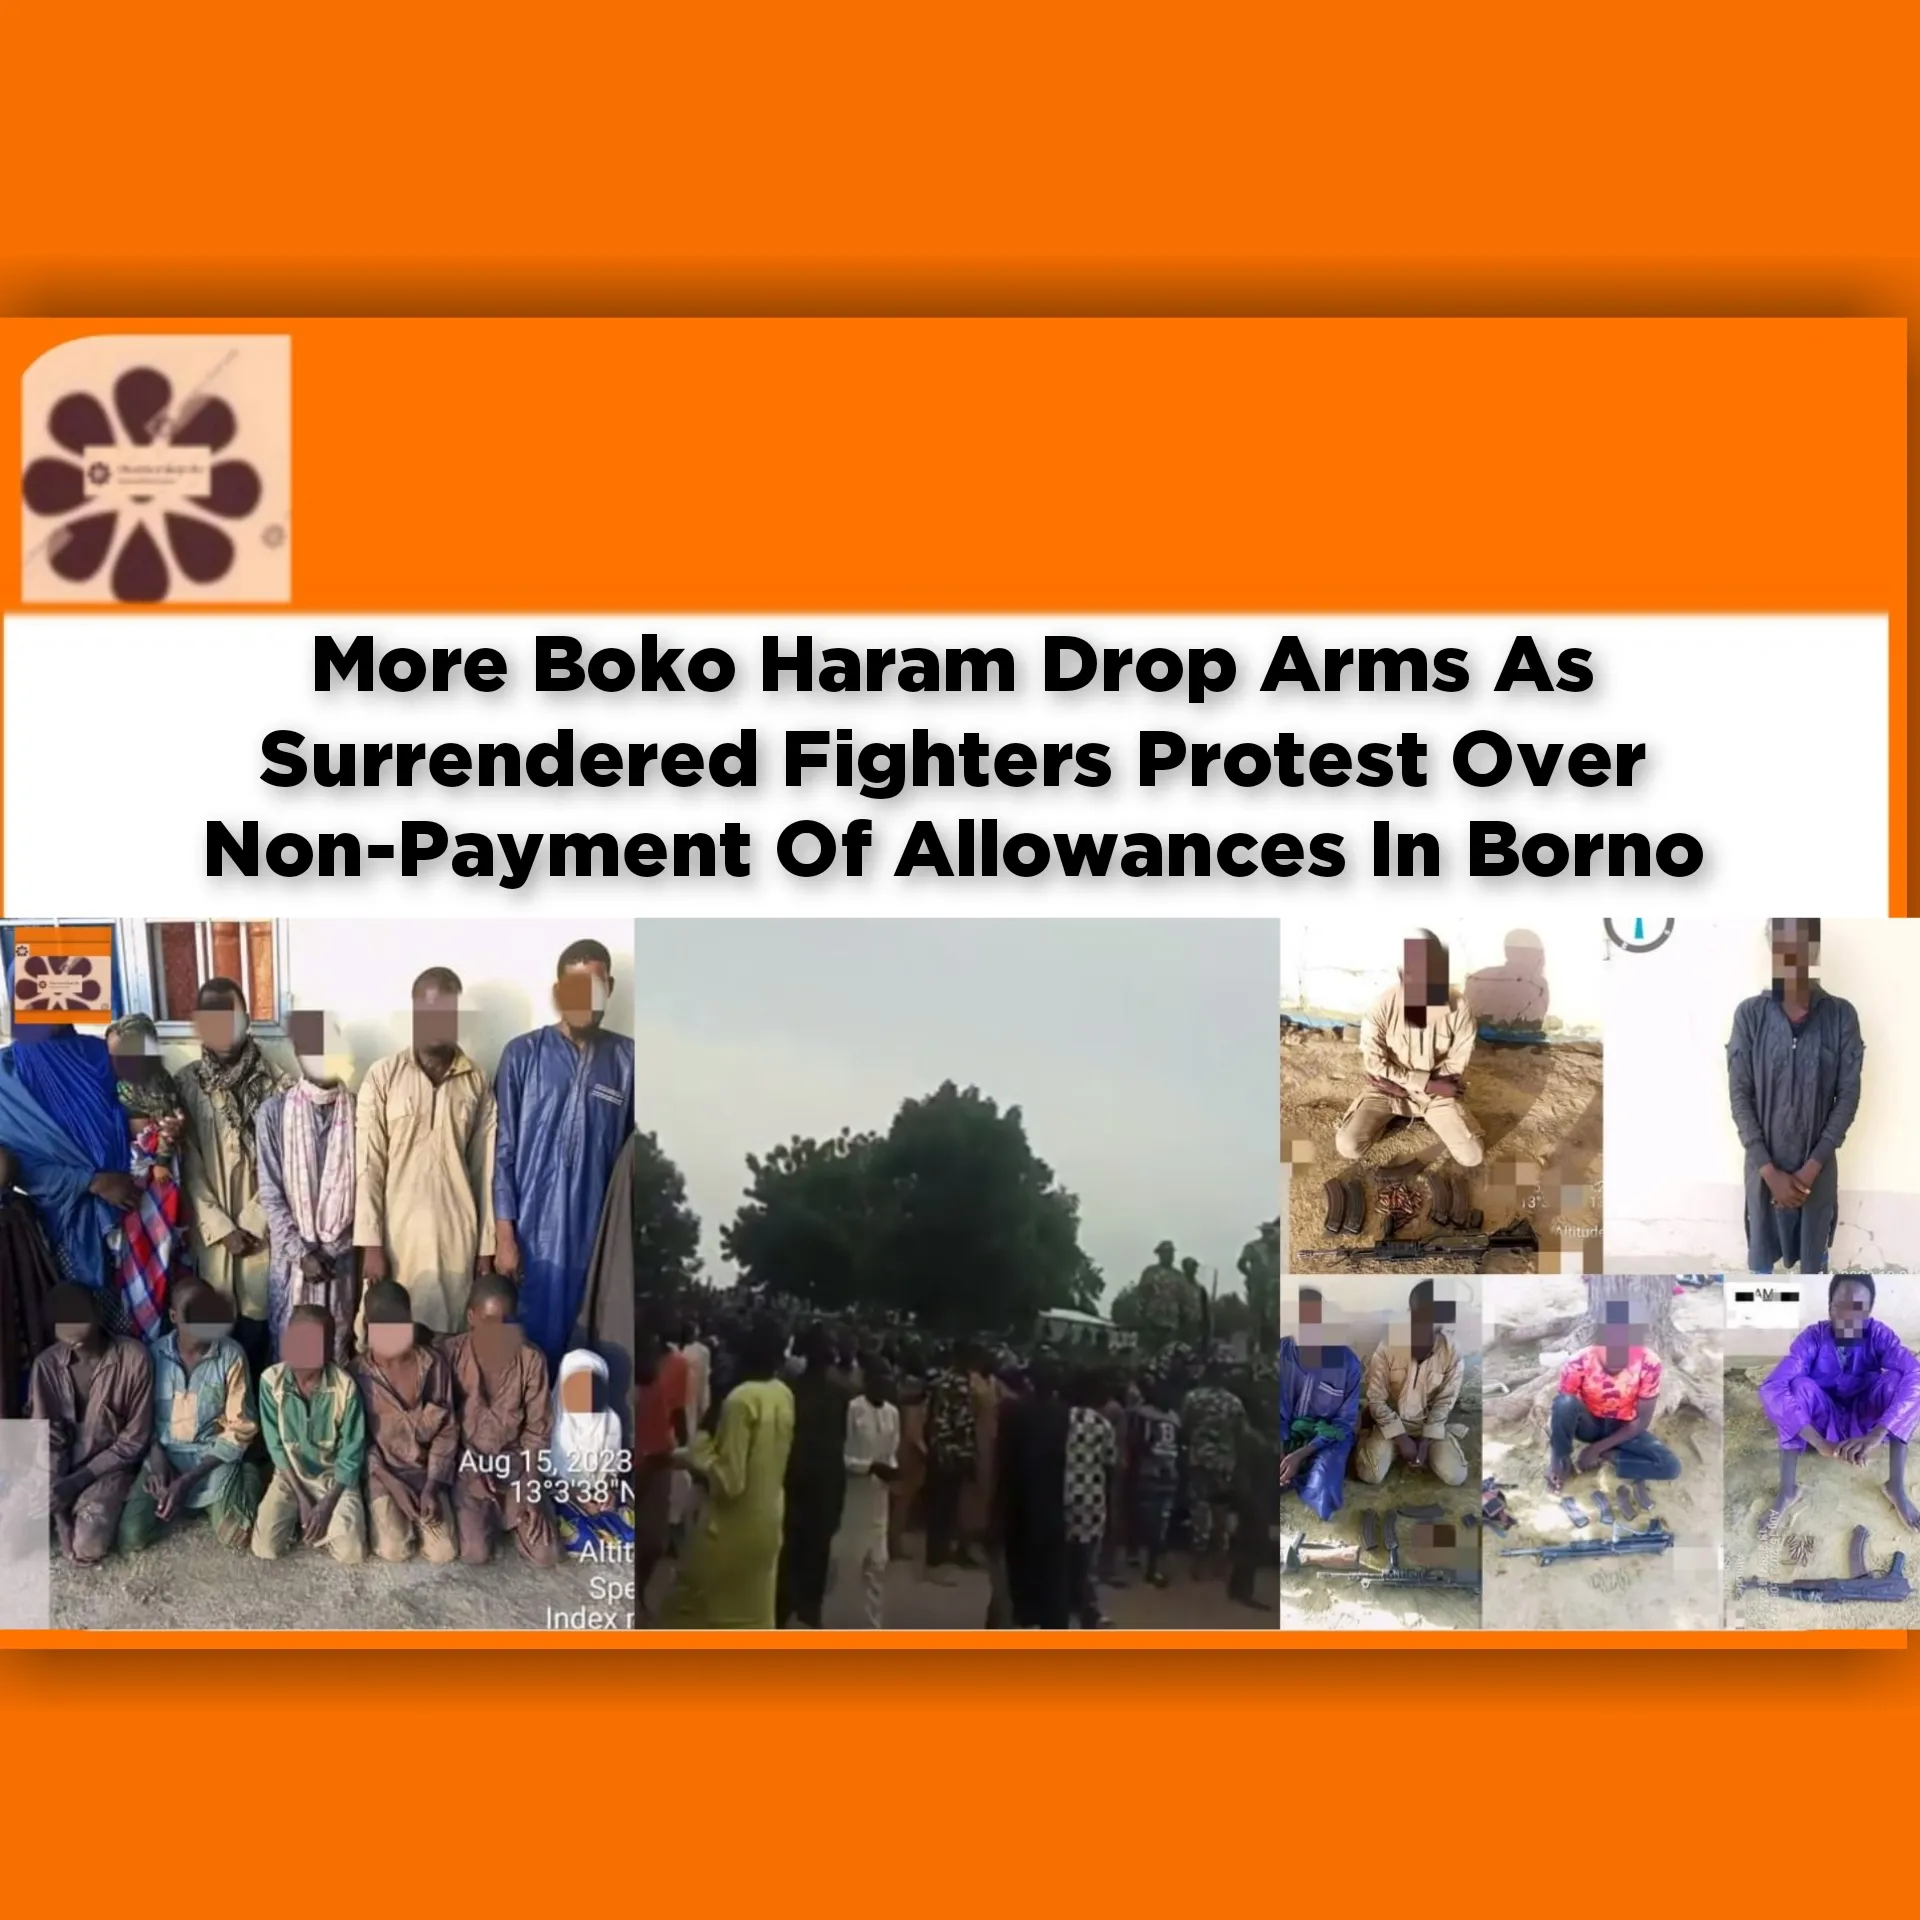 More Boko Haram Drop Arms As Surrendered Fighters Protest Over Non-Payment Of Allowances In Borno ~ OsazuwaAkonedo ####Boko #allowances #Bola #Borno #FG #Haram #Surrender #Tinubu